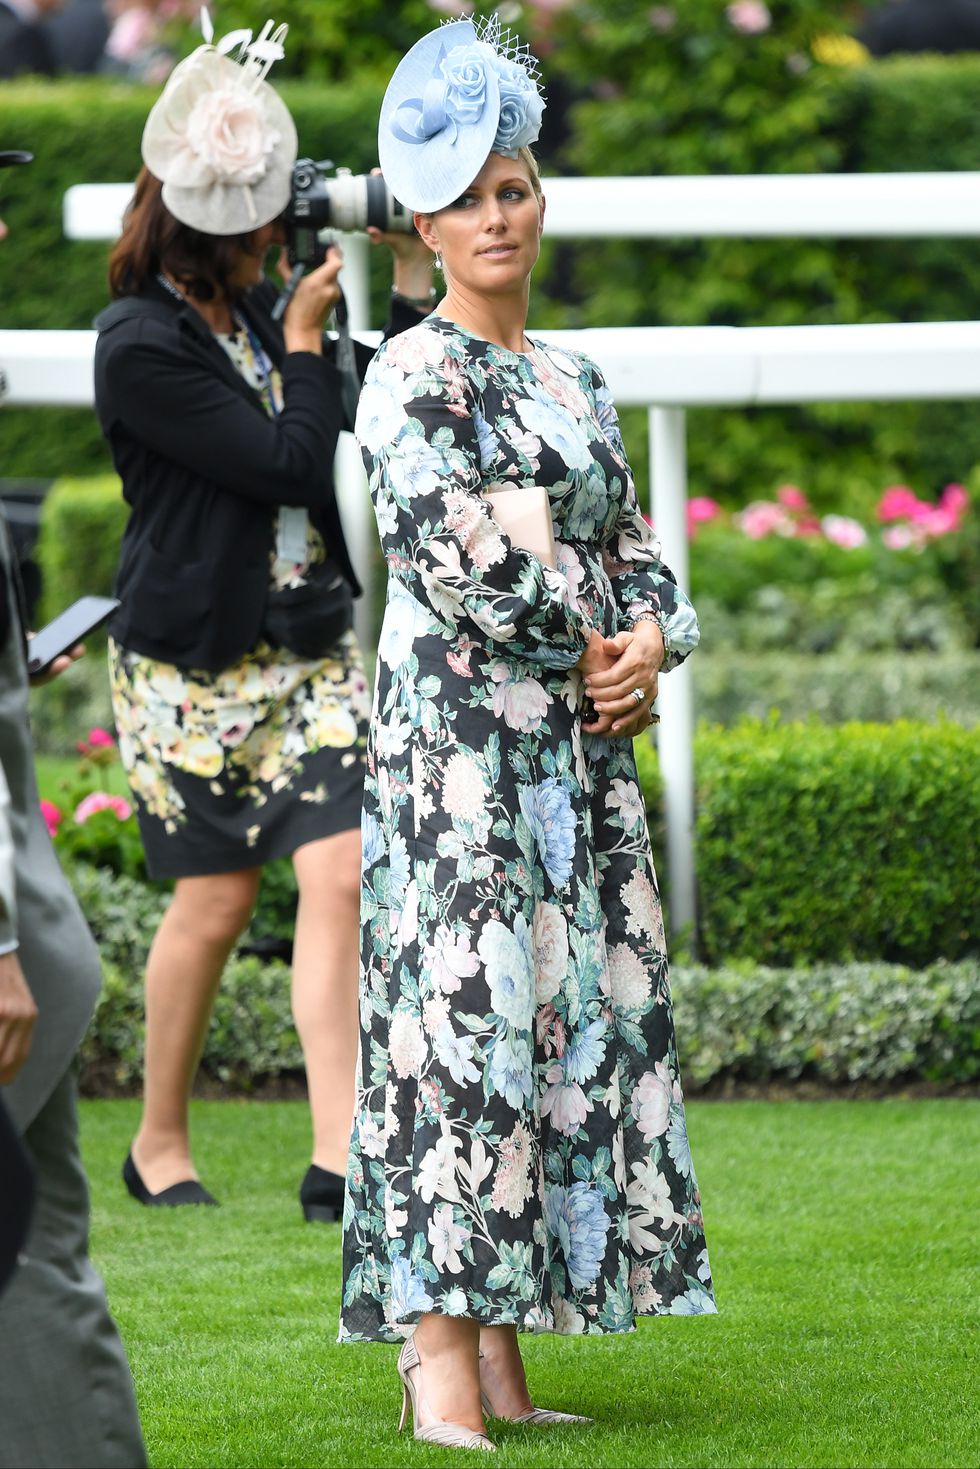 zara-phillips-attends-day-one-of-royal-ascot-at-ascot-news-photo-1156722630-1560870472.jpg